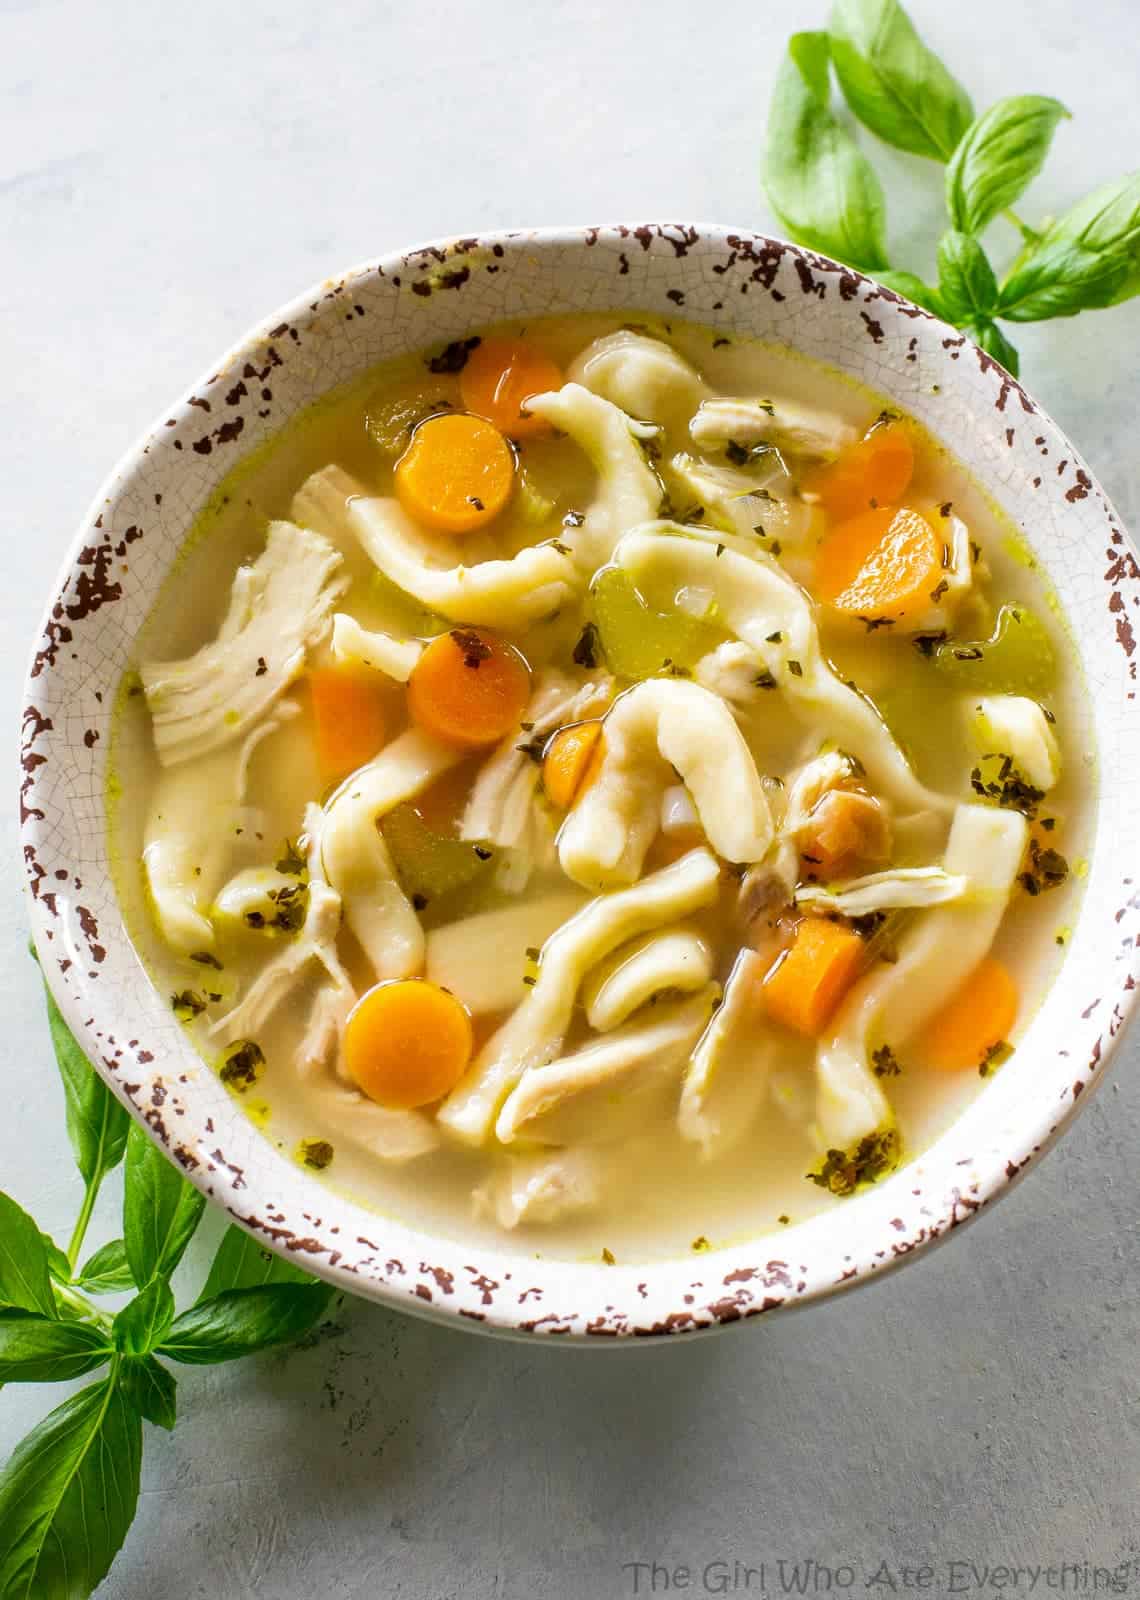 https://www.the-girl-who-ate-everything.com/wp-content/uploads/2016/10/homemade-chicken-noodle-soup-14.jpg